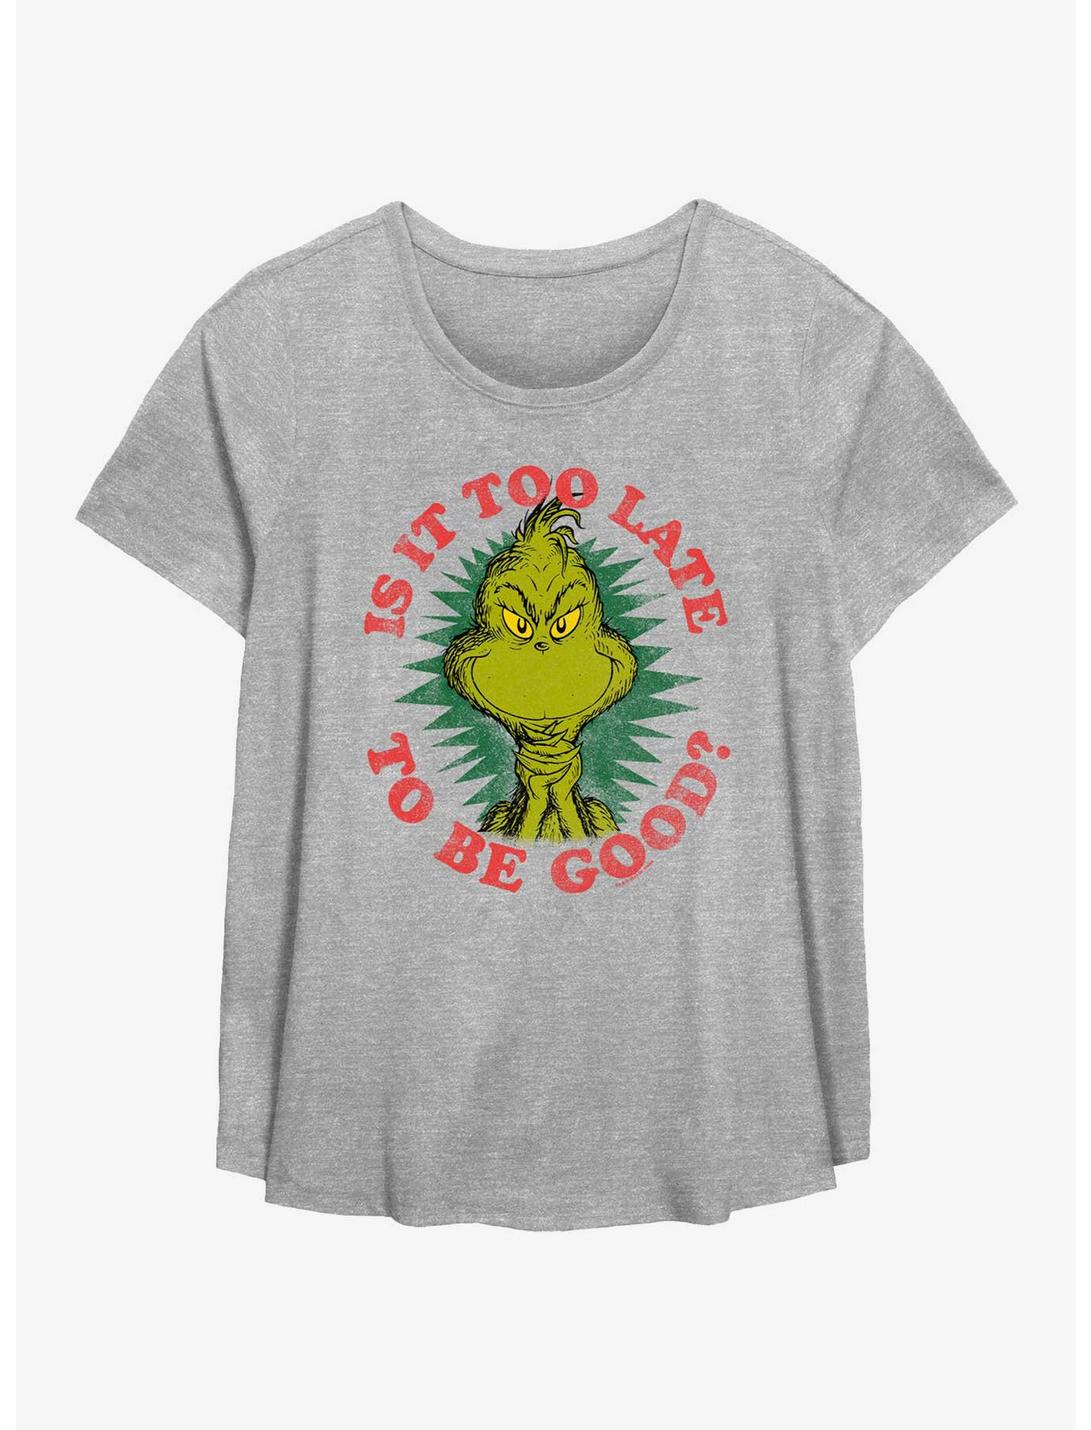 Dr. Seuss How The Grinch Stole Christmas Too Late To Be Good Girls T-Shirt Plus Size, HEATHER GR, hi-res